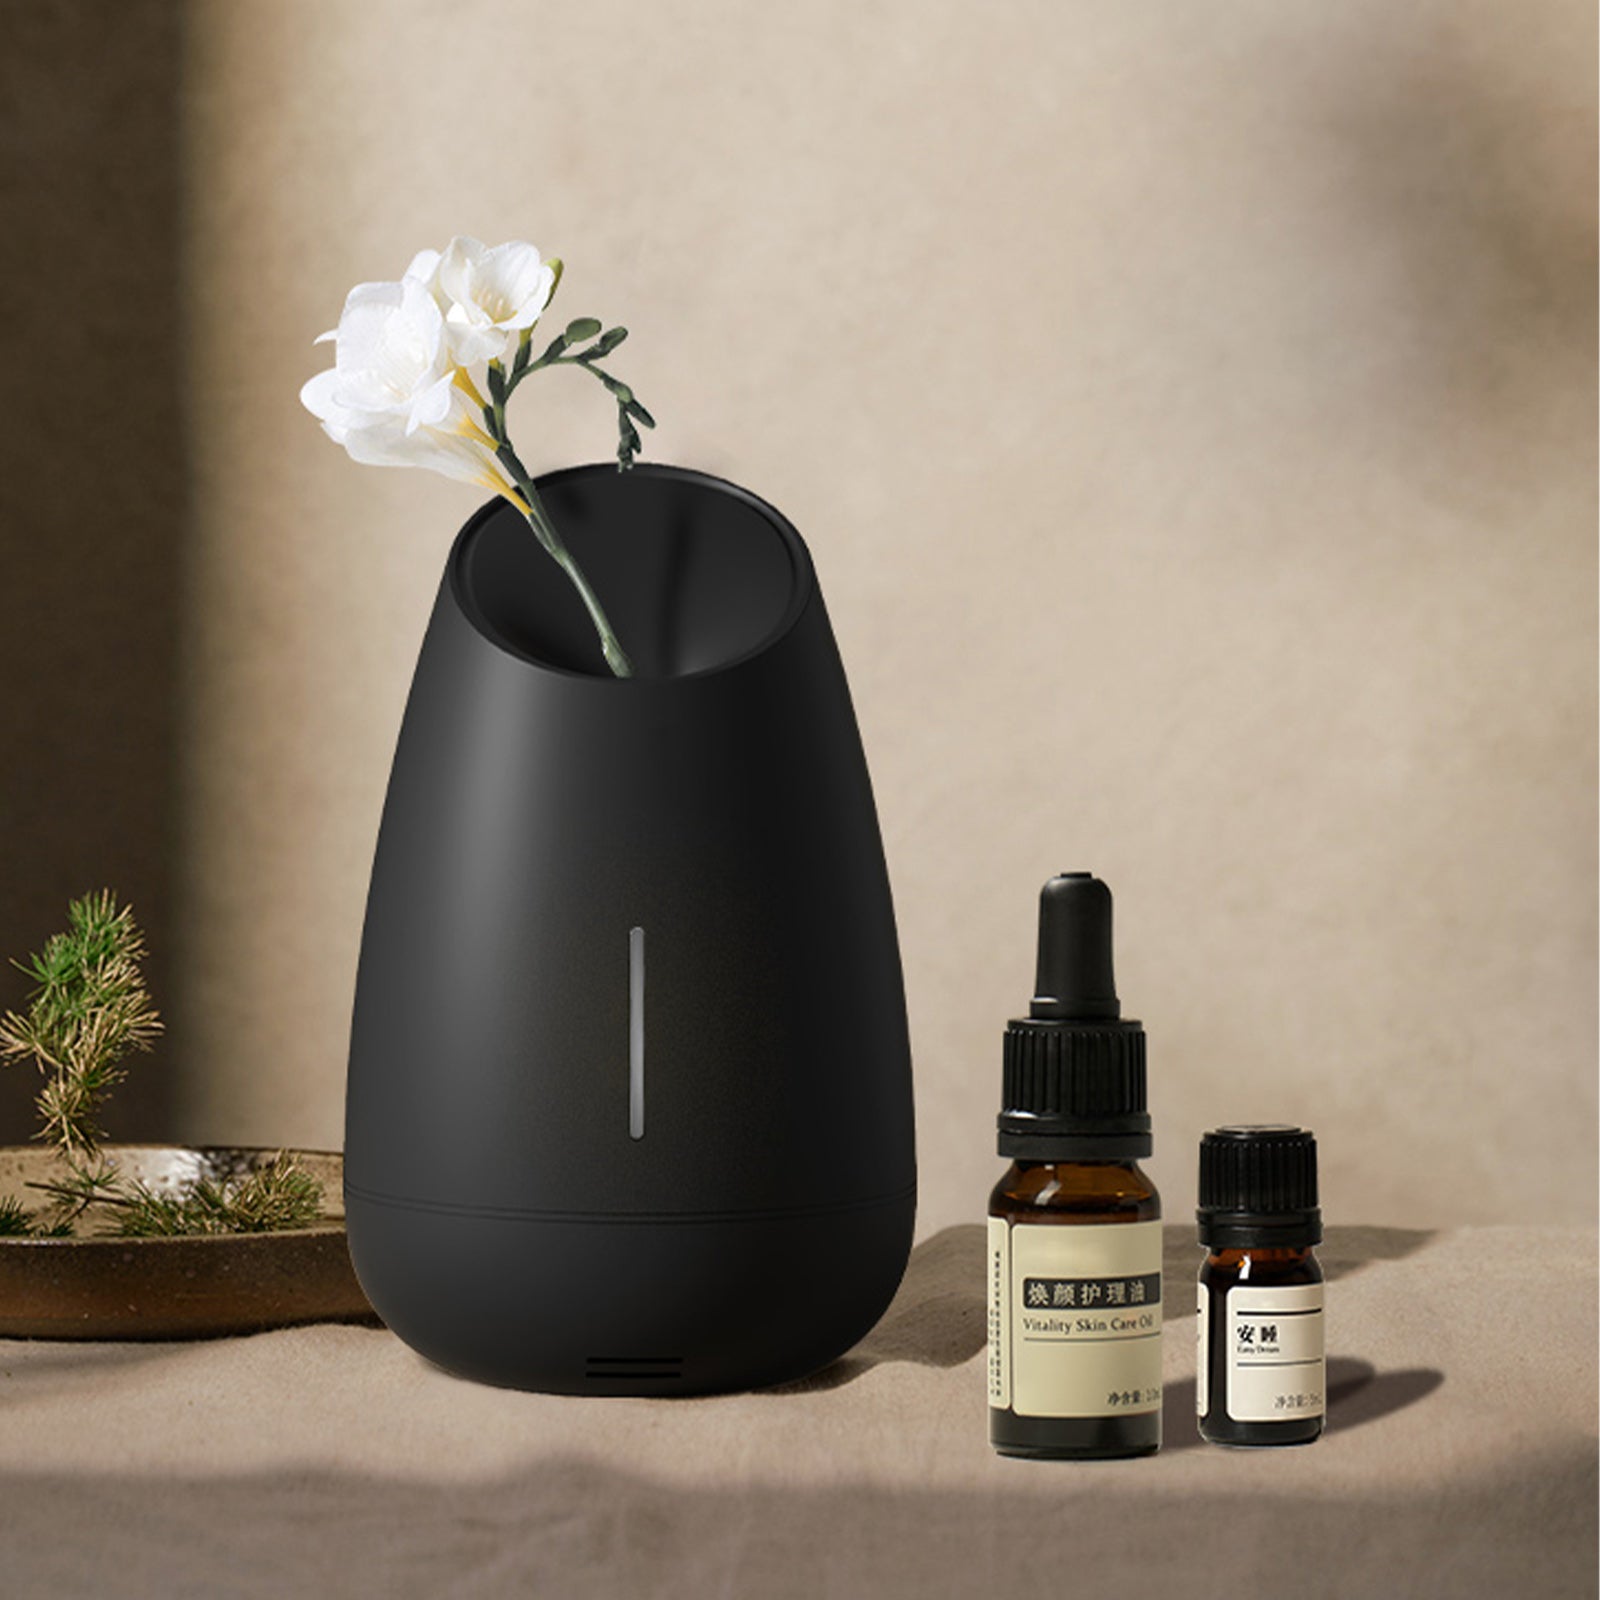 MIPOW VASO 3.0 Music Aromatherapy Diffuser Humidifier with Built